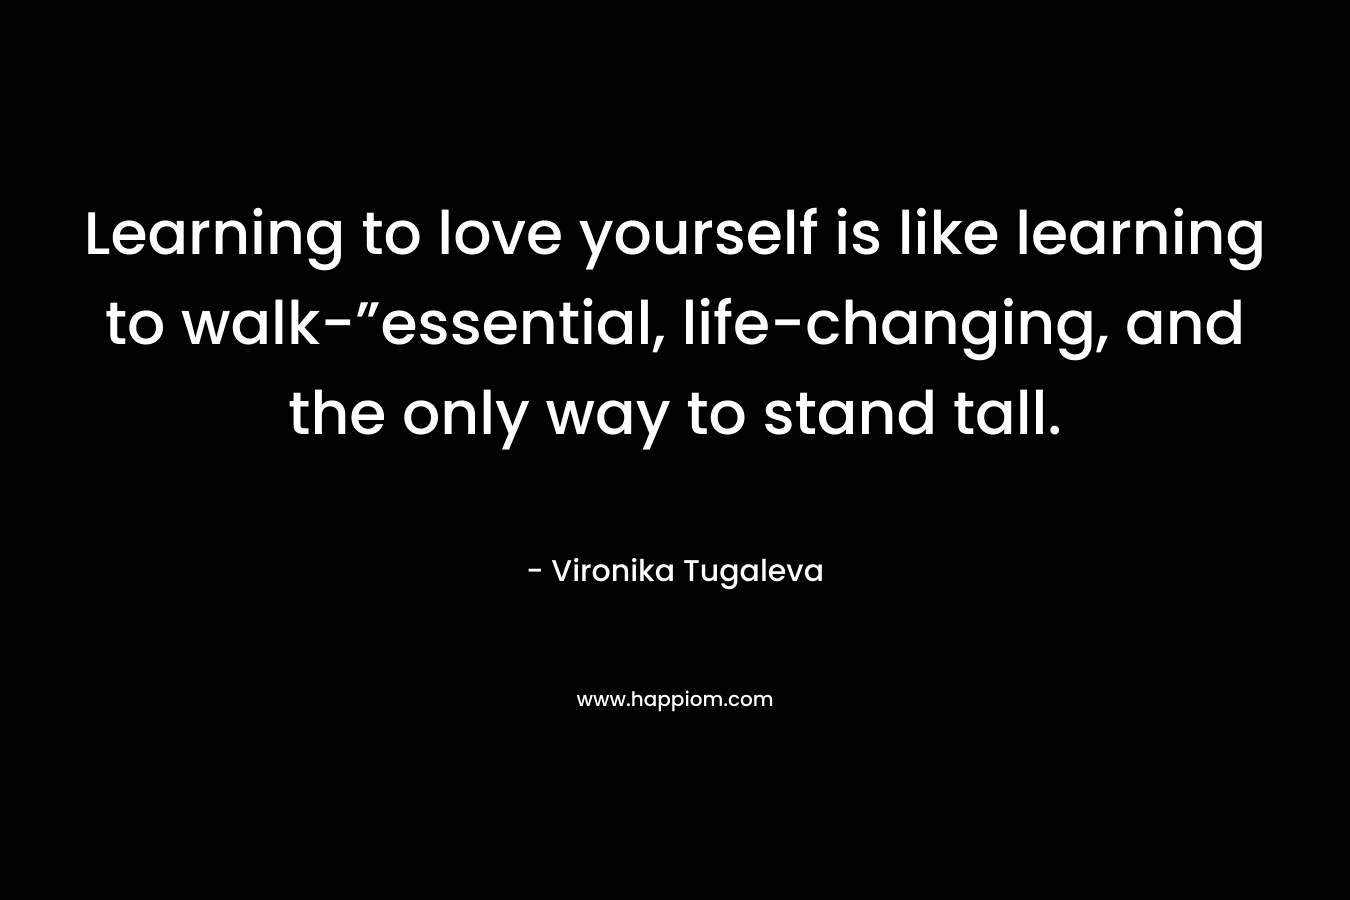 Learning to love yourself is like learning to walk-”essential, life-changing, and the only way to stand tall.